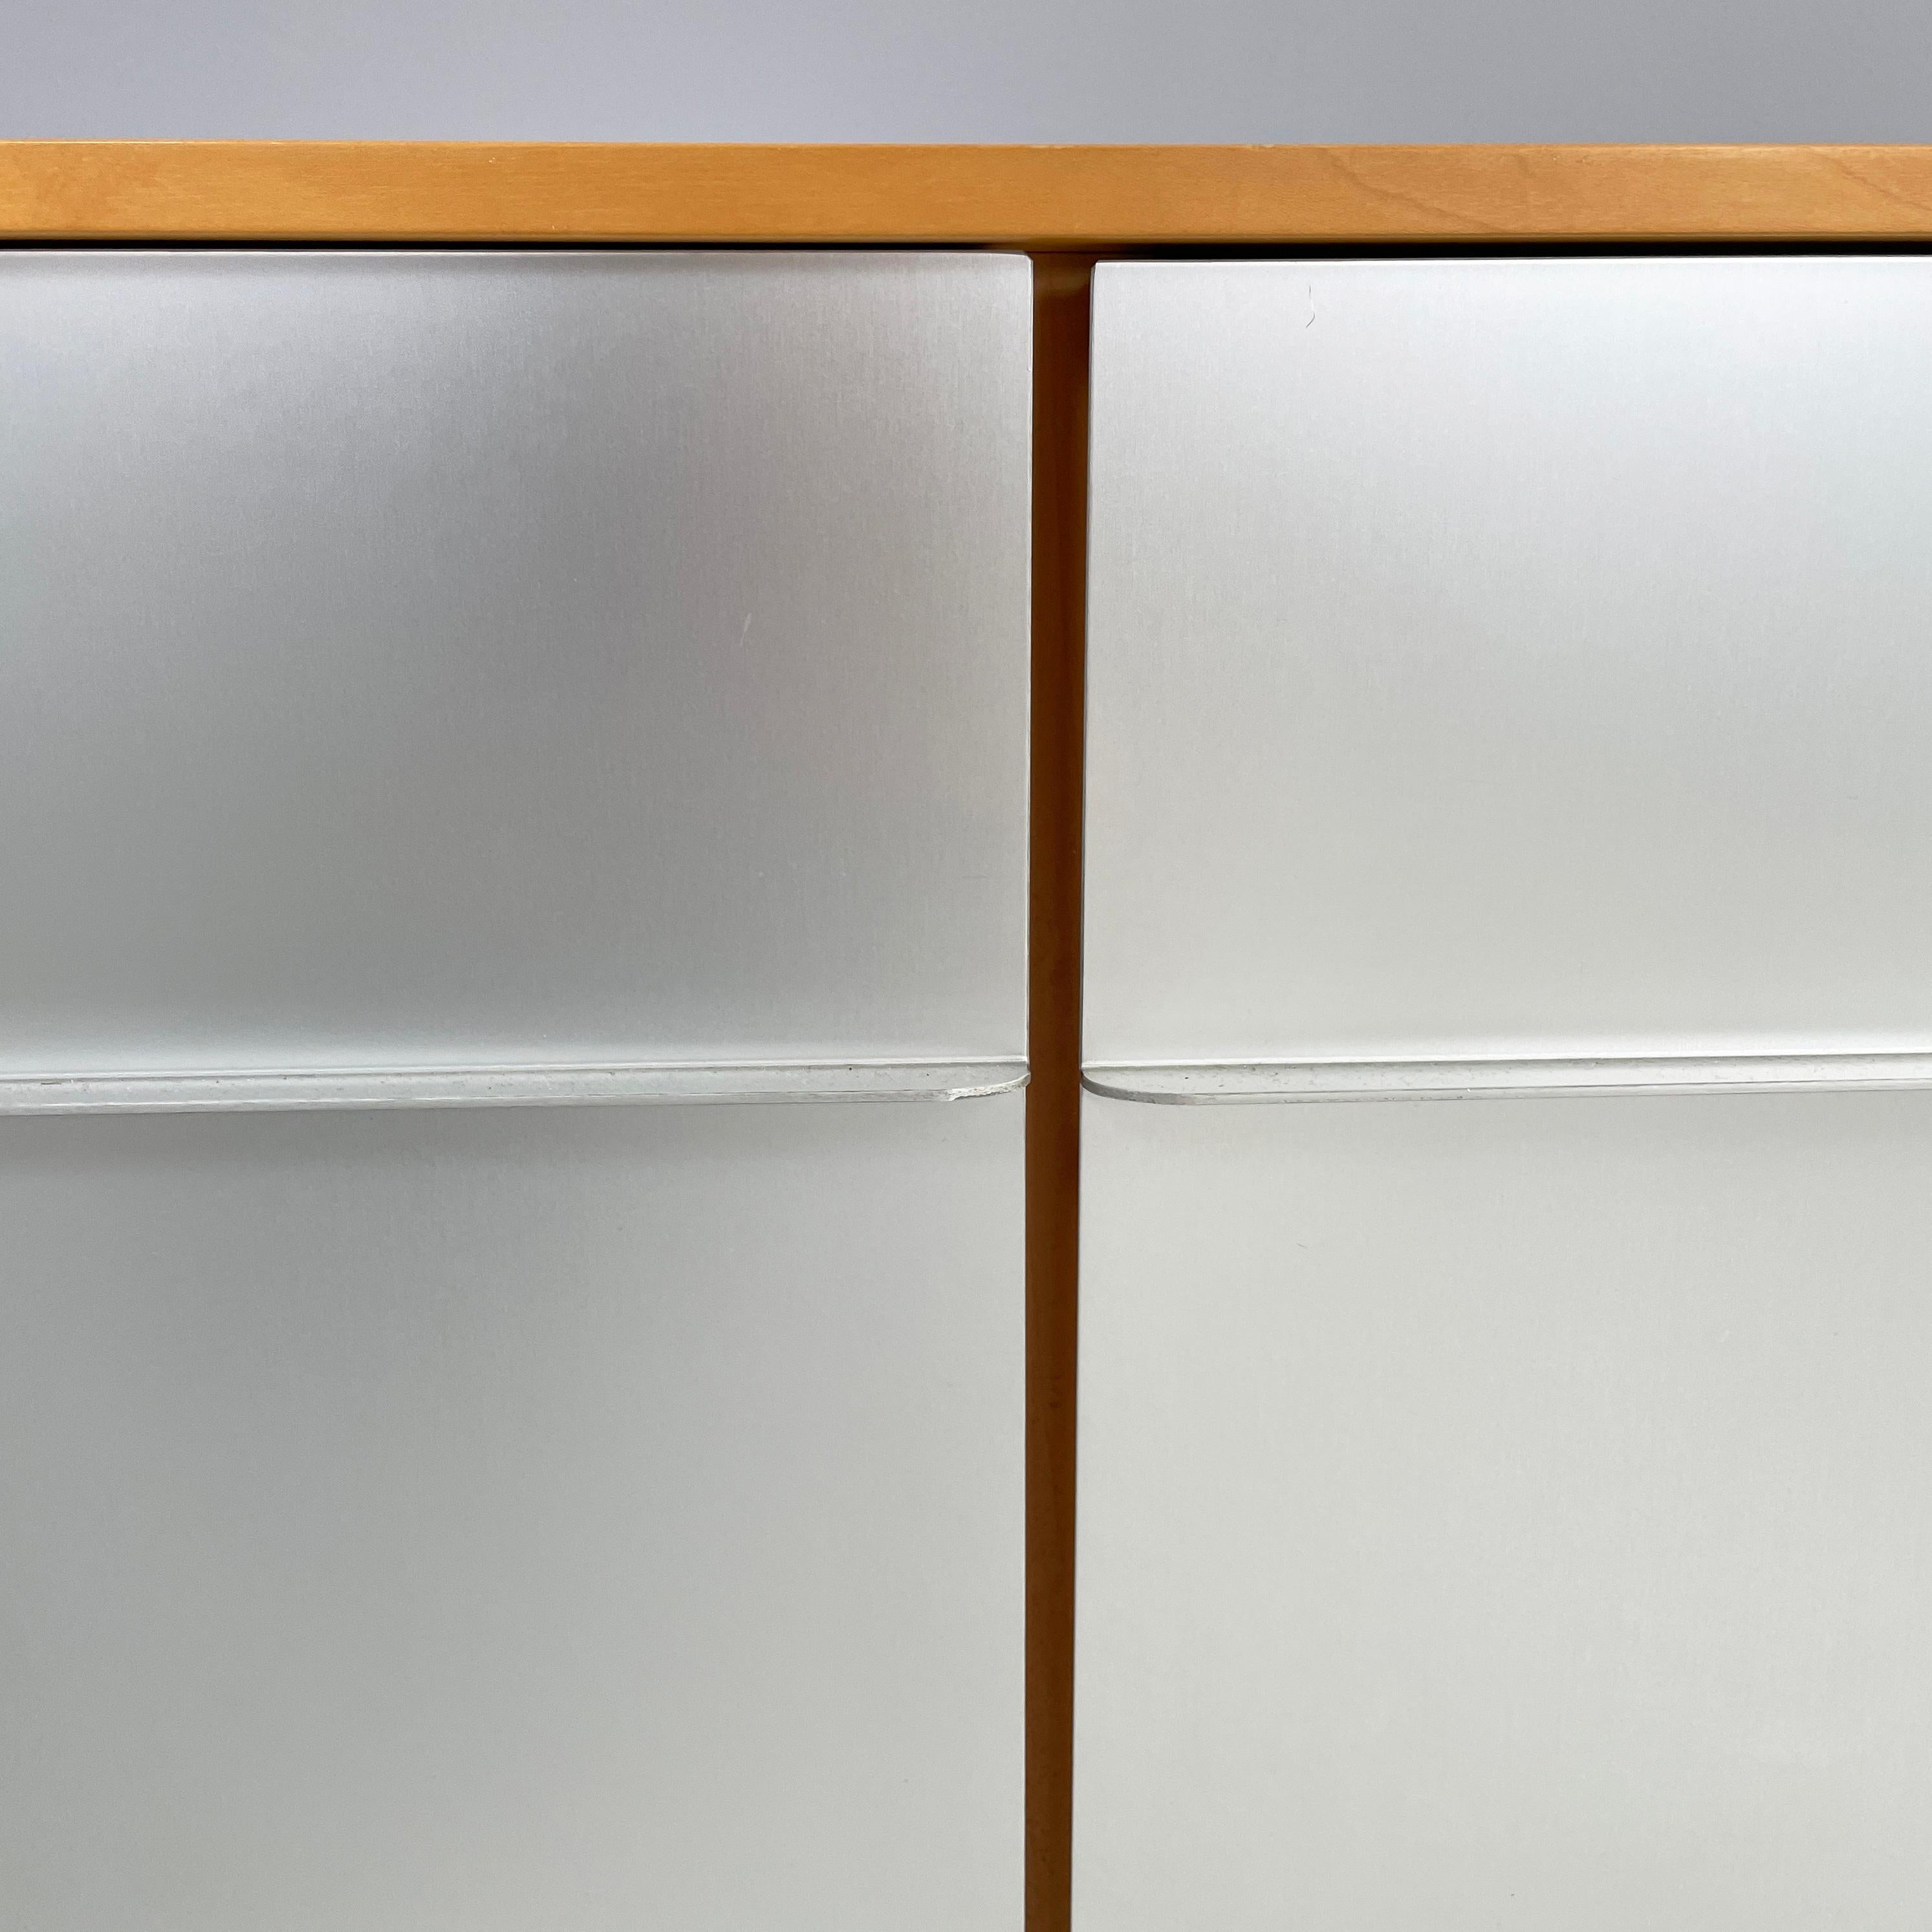 Italian modern wood and metal sideboard by Vico Magistretti for De Padova, 1980s For Sale 11